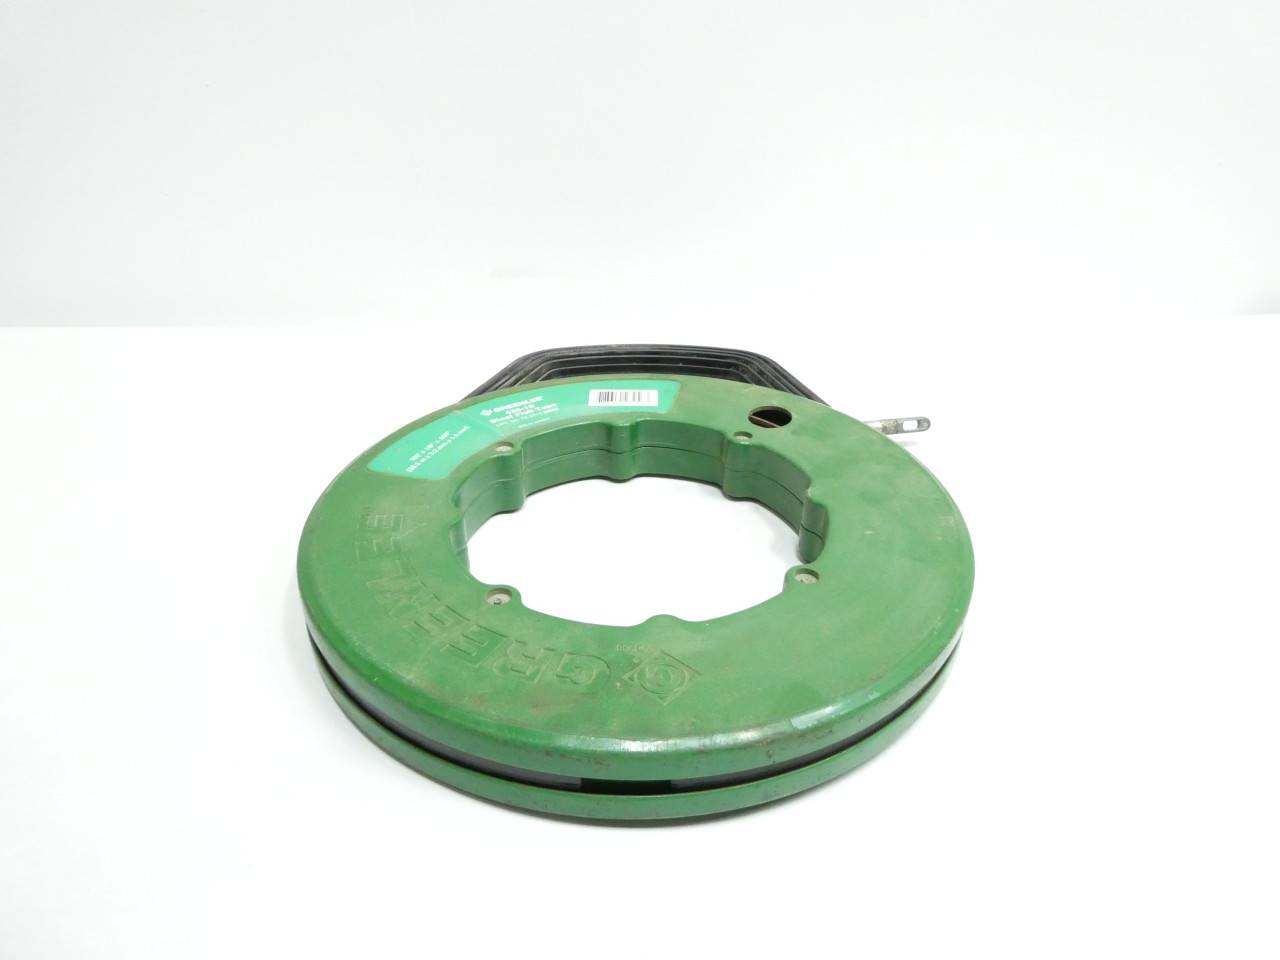 GREENLEE 438-10 STEEL FISH TAPE 100FT X 1/8IN X 0.060IN OTHER MEASUREMENT  TOOL